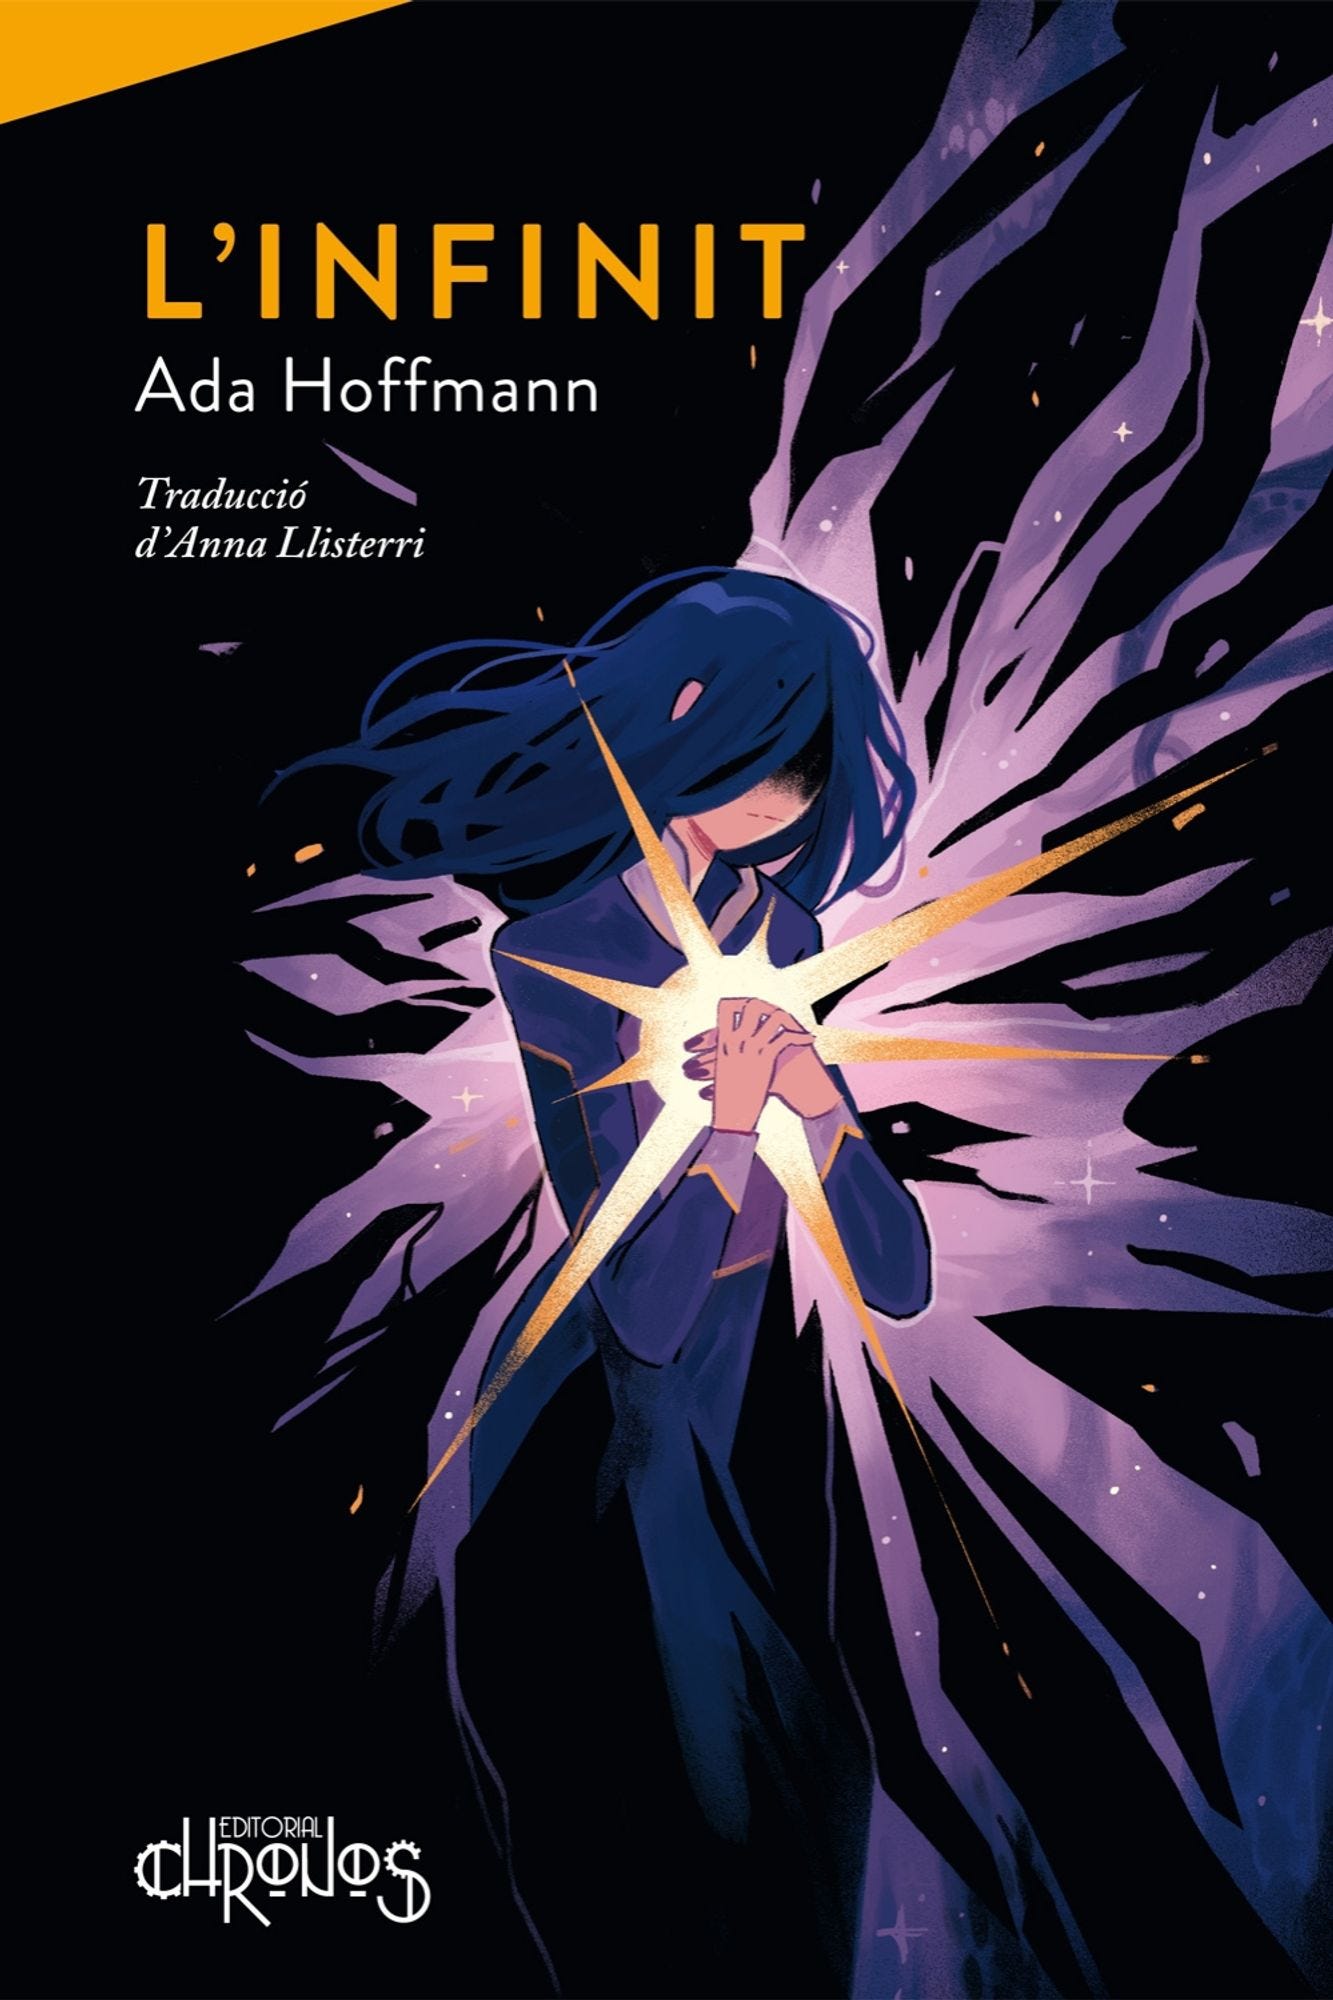 Cover of the Catalan translation of THE INFINITE. The text on the cover says "L'INFINIT, Ada Hoffmann, Traduccio d'Anna Llisterri. The art shows a stylized human figure with long black hair obscuring her face, clasping her hands in front of her chest. White and golden ight blazes out from her clasped hands. Purple light also streams in an irregular pattern behind her, sharply contrasted against a black background.